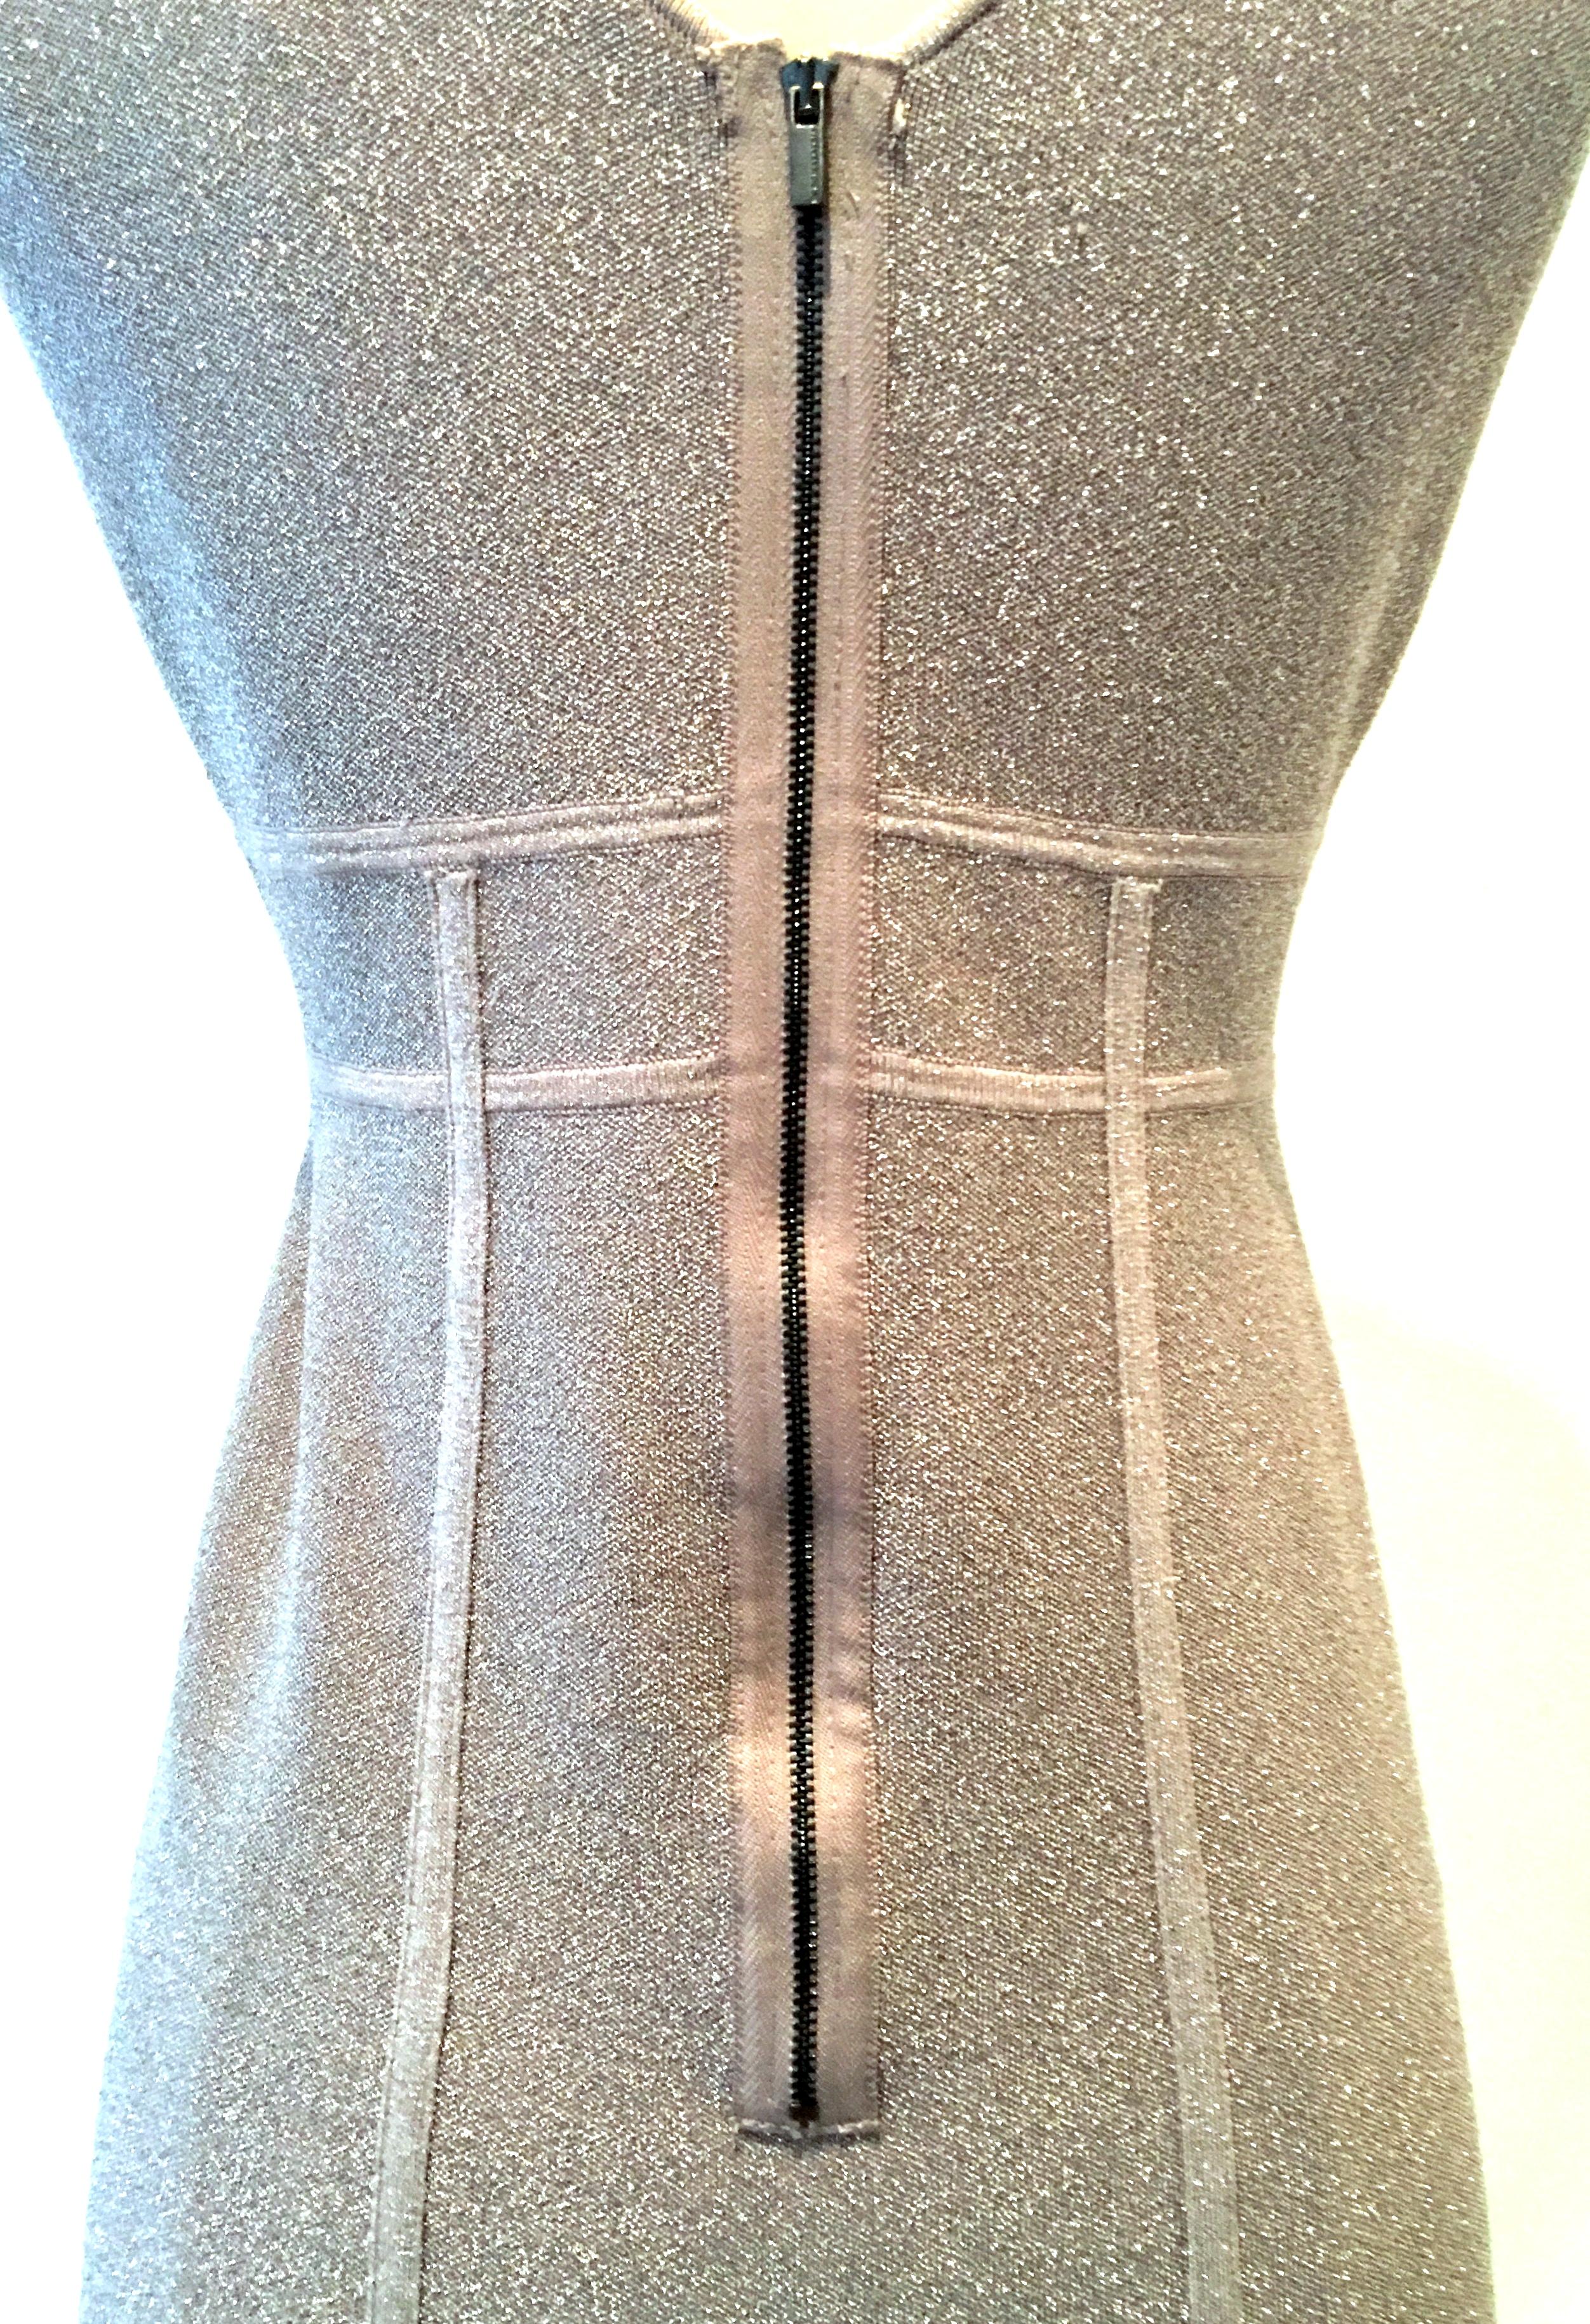 21st Century Herve Leger Style Metallic Cocktail Dress By Maxazria For BCBG  For Sale 3